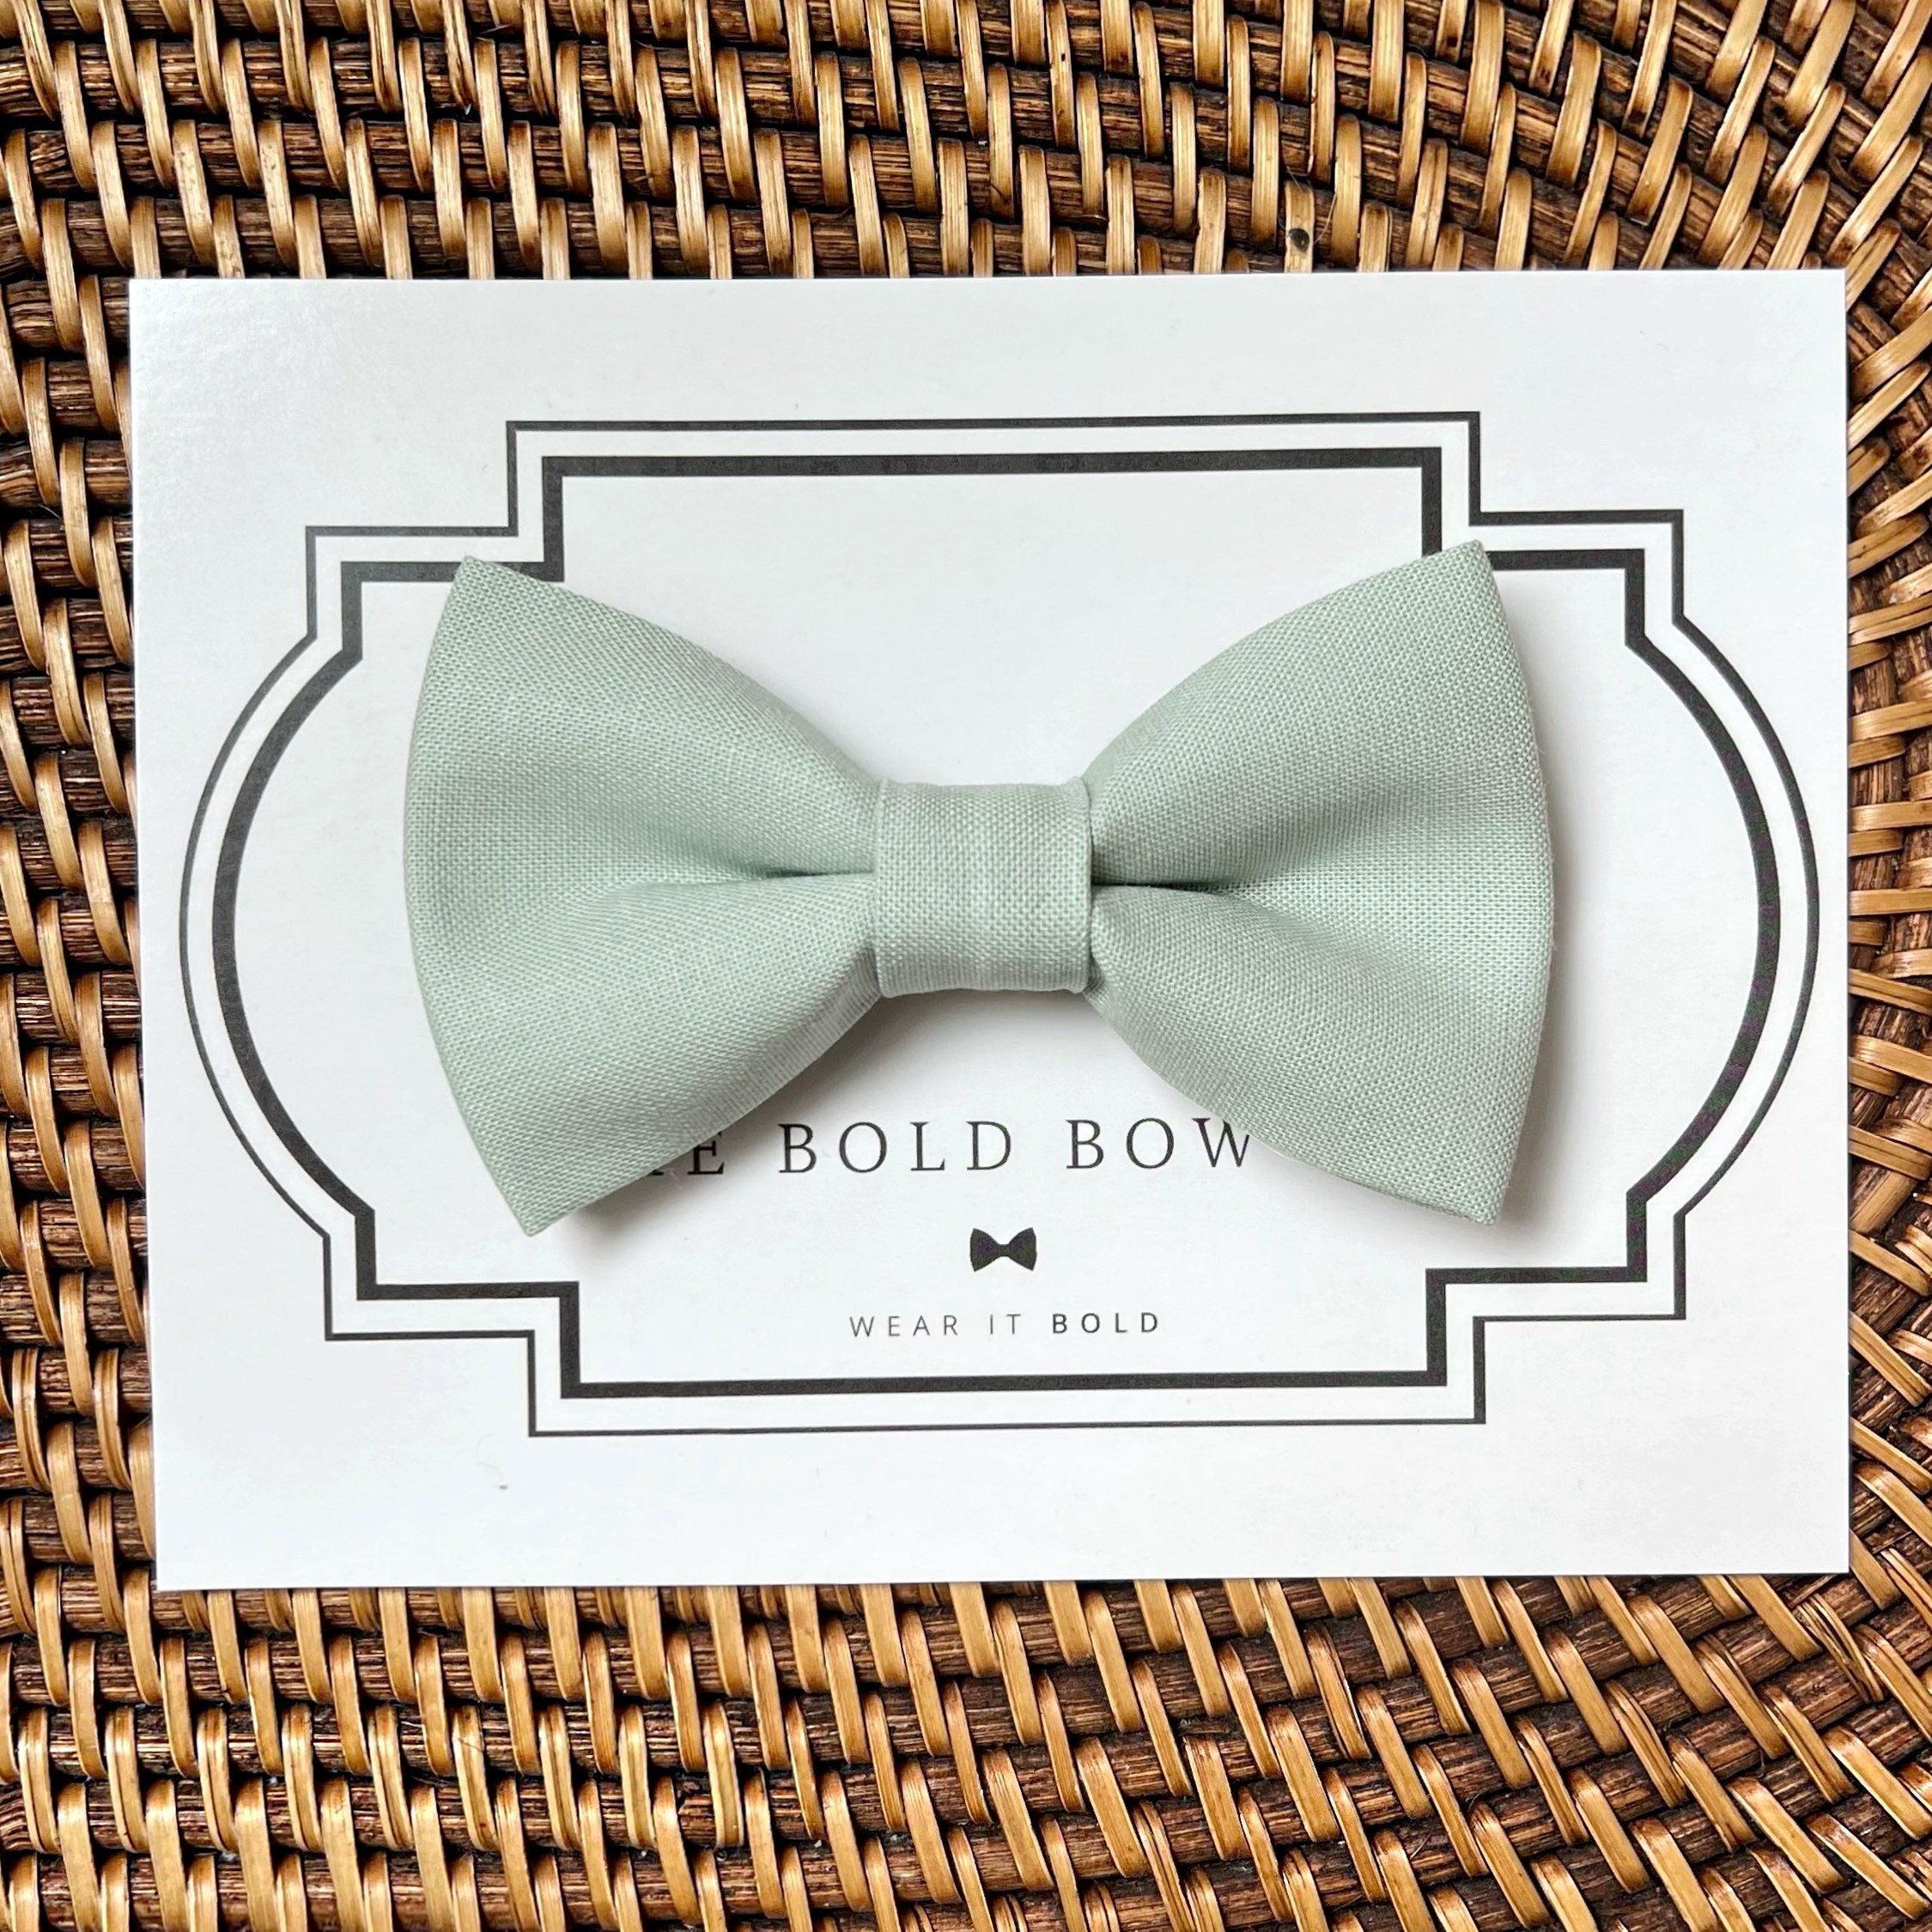 Wedding Dog Bow Tie Collar - Olive Green Chambray